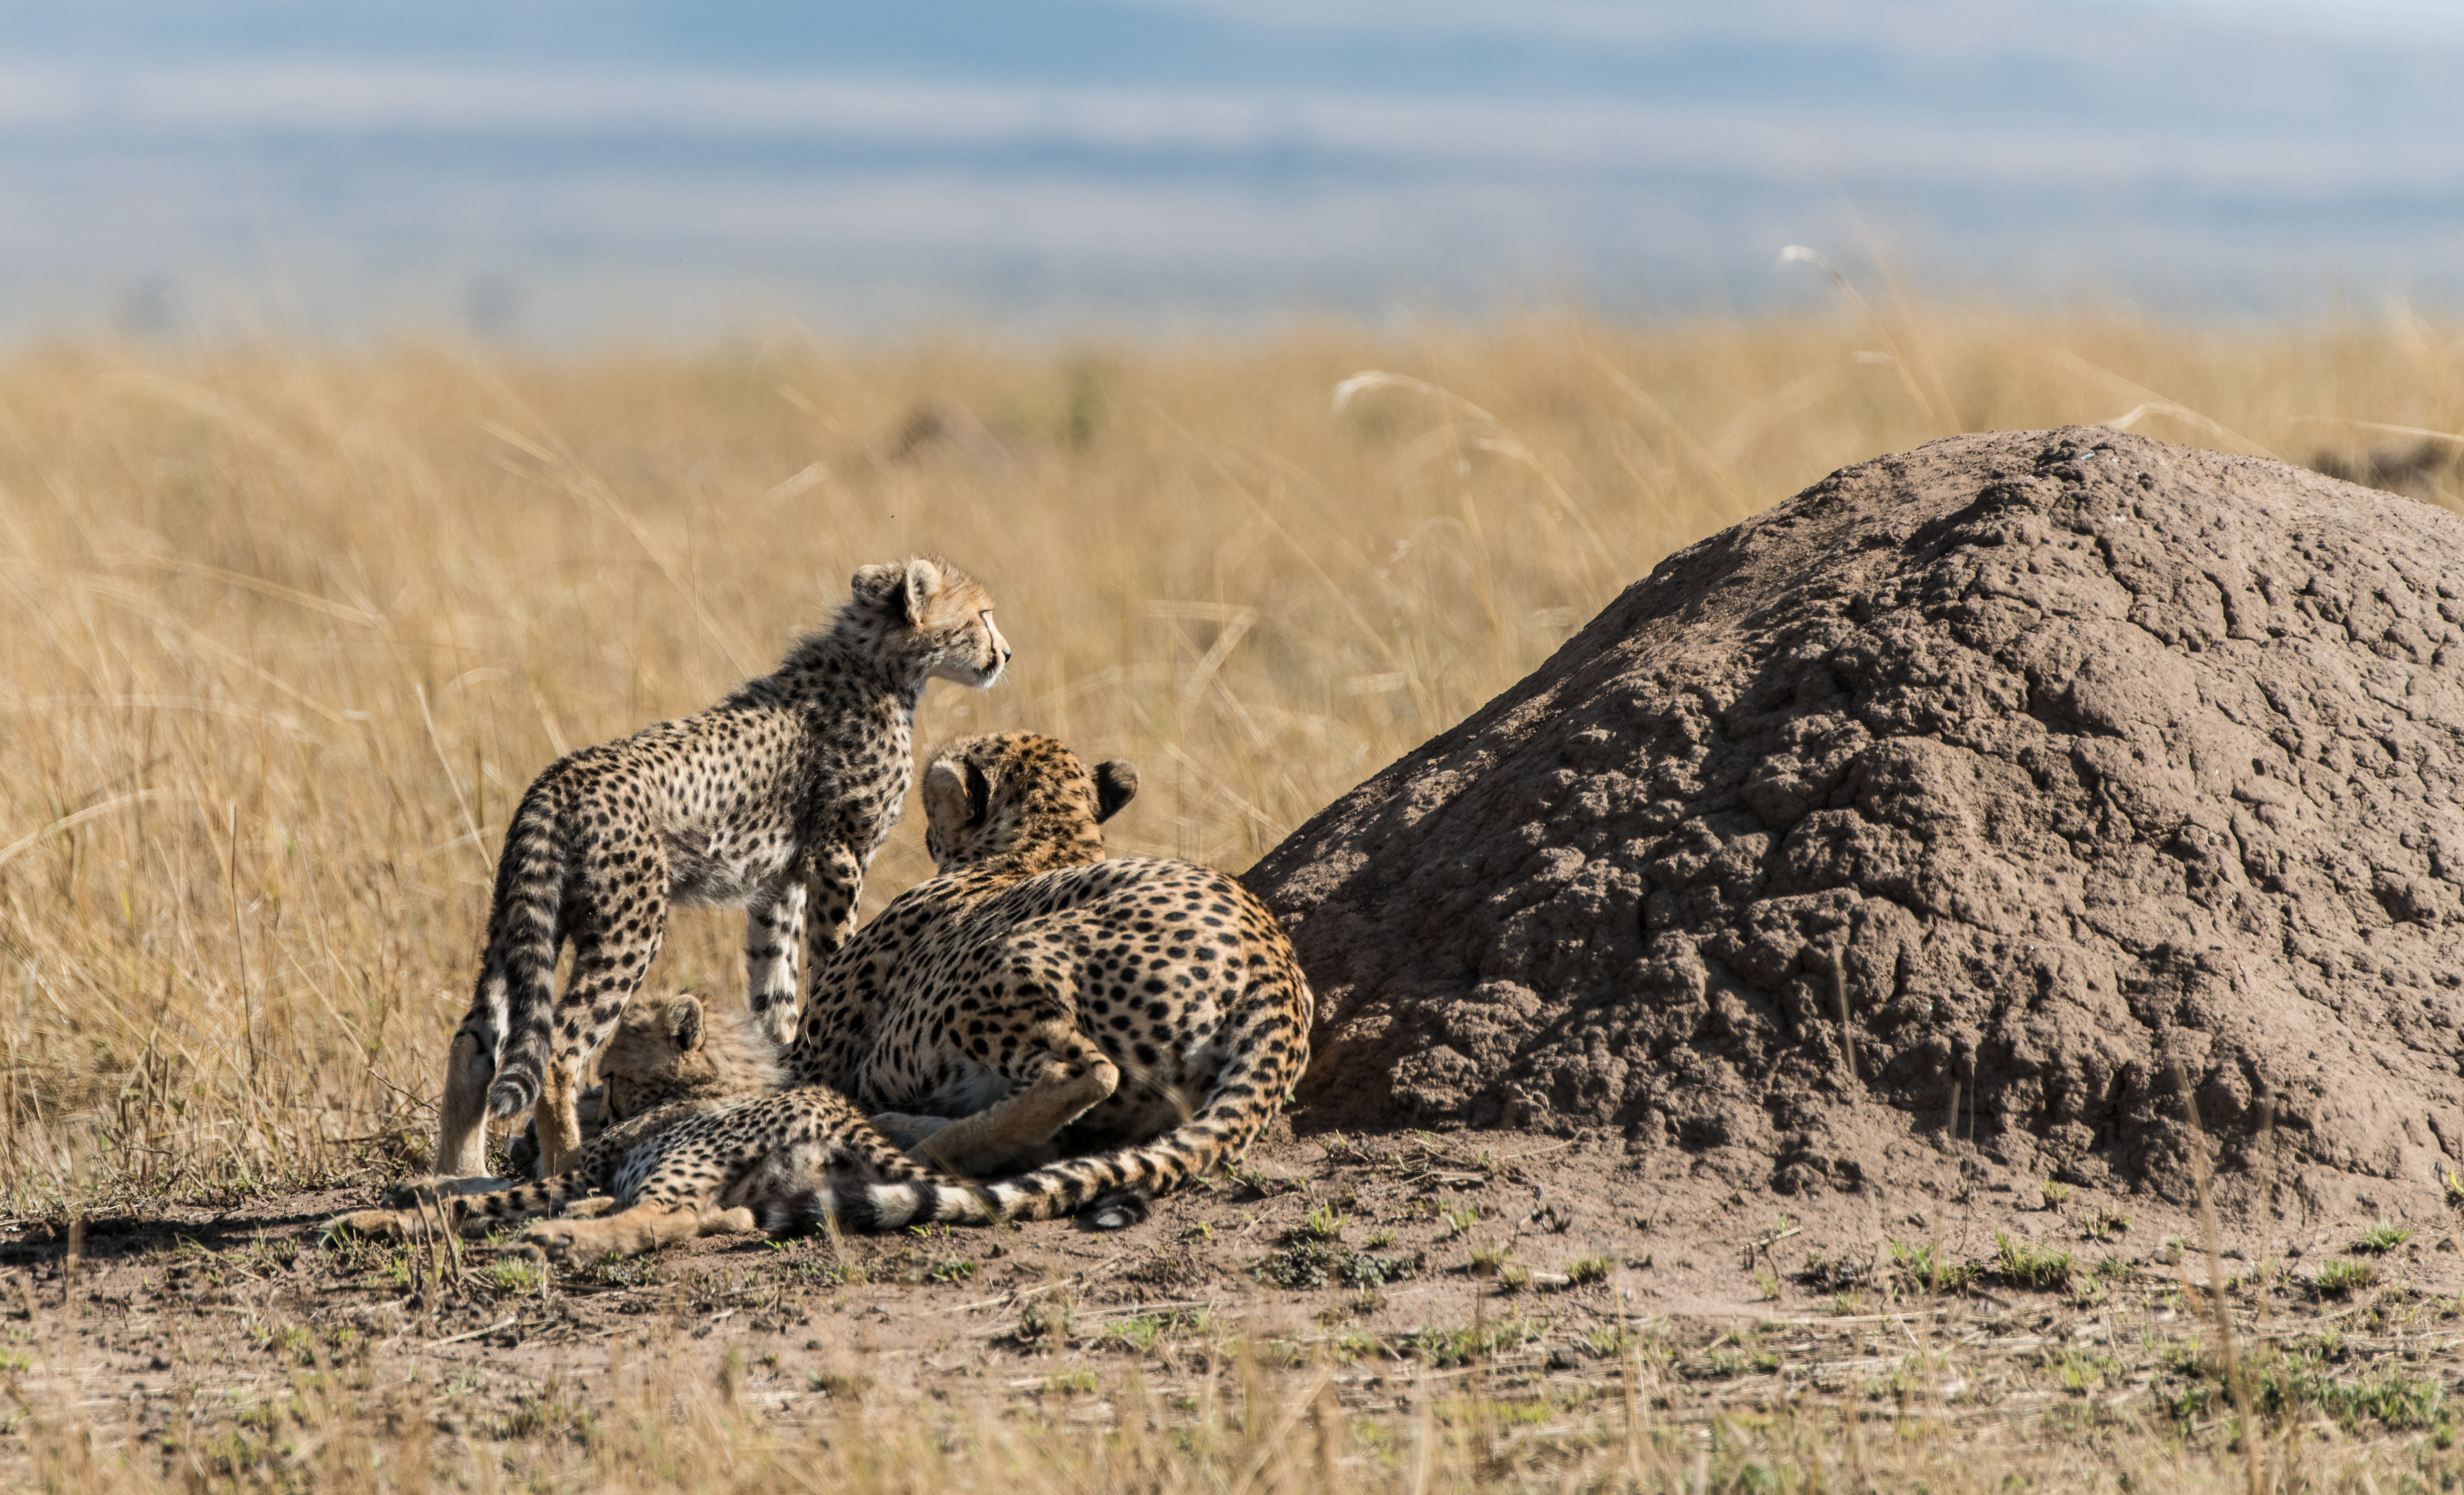 Cheetah with very young cubs sitting by a termite mound